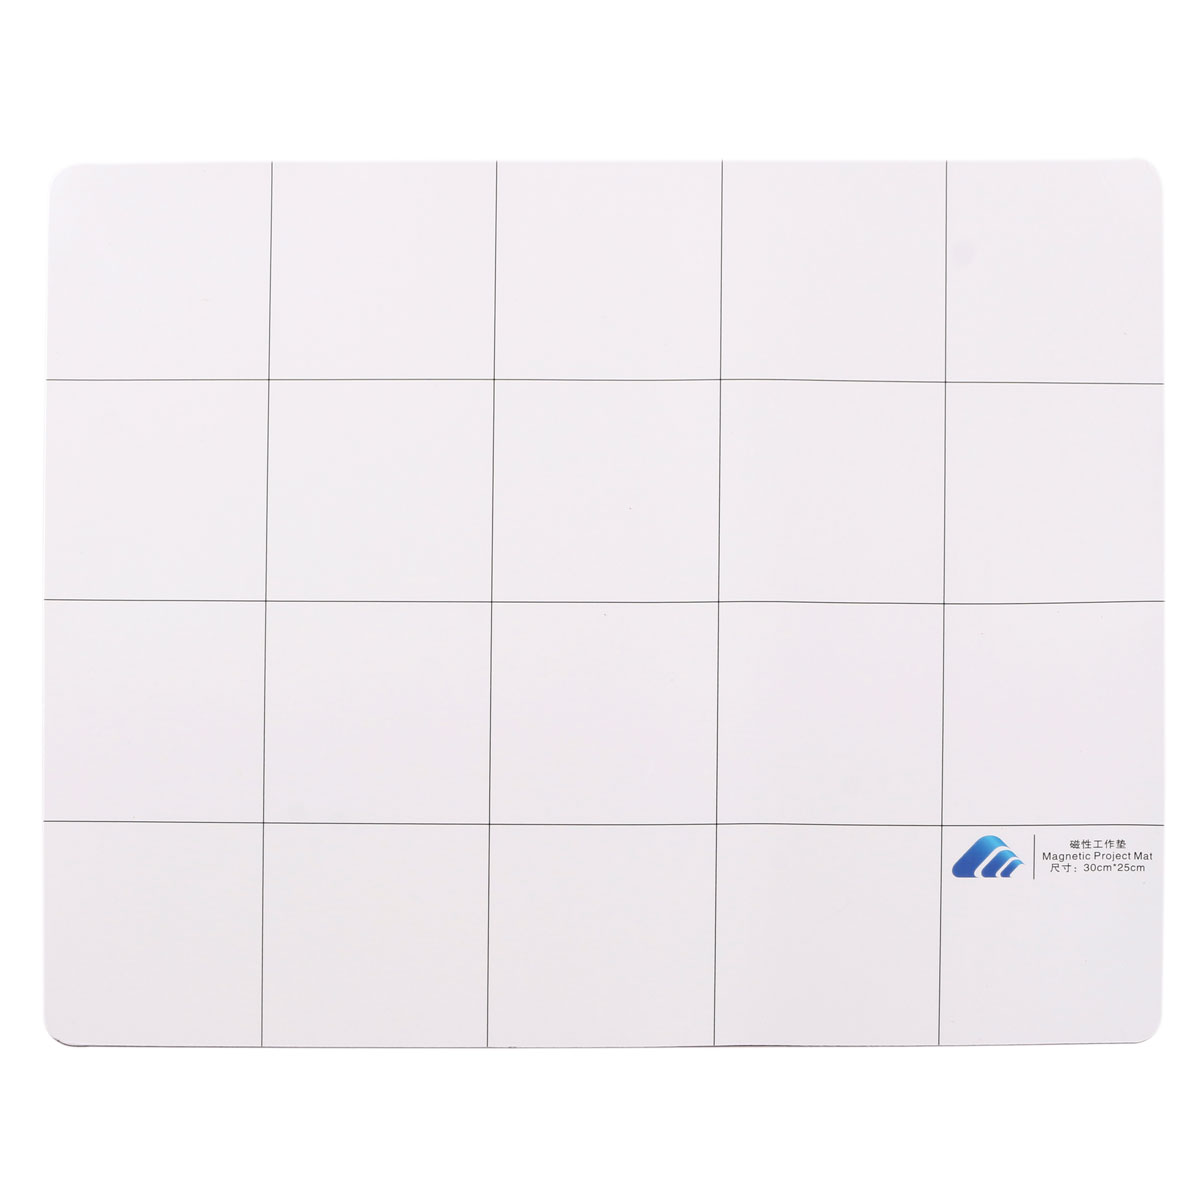 1Pcs Wholesale Silicone Magnetic Project Mat Paid Pad Tool for Mobile Phone Repairing Rework 30cm X 25cm